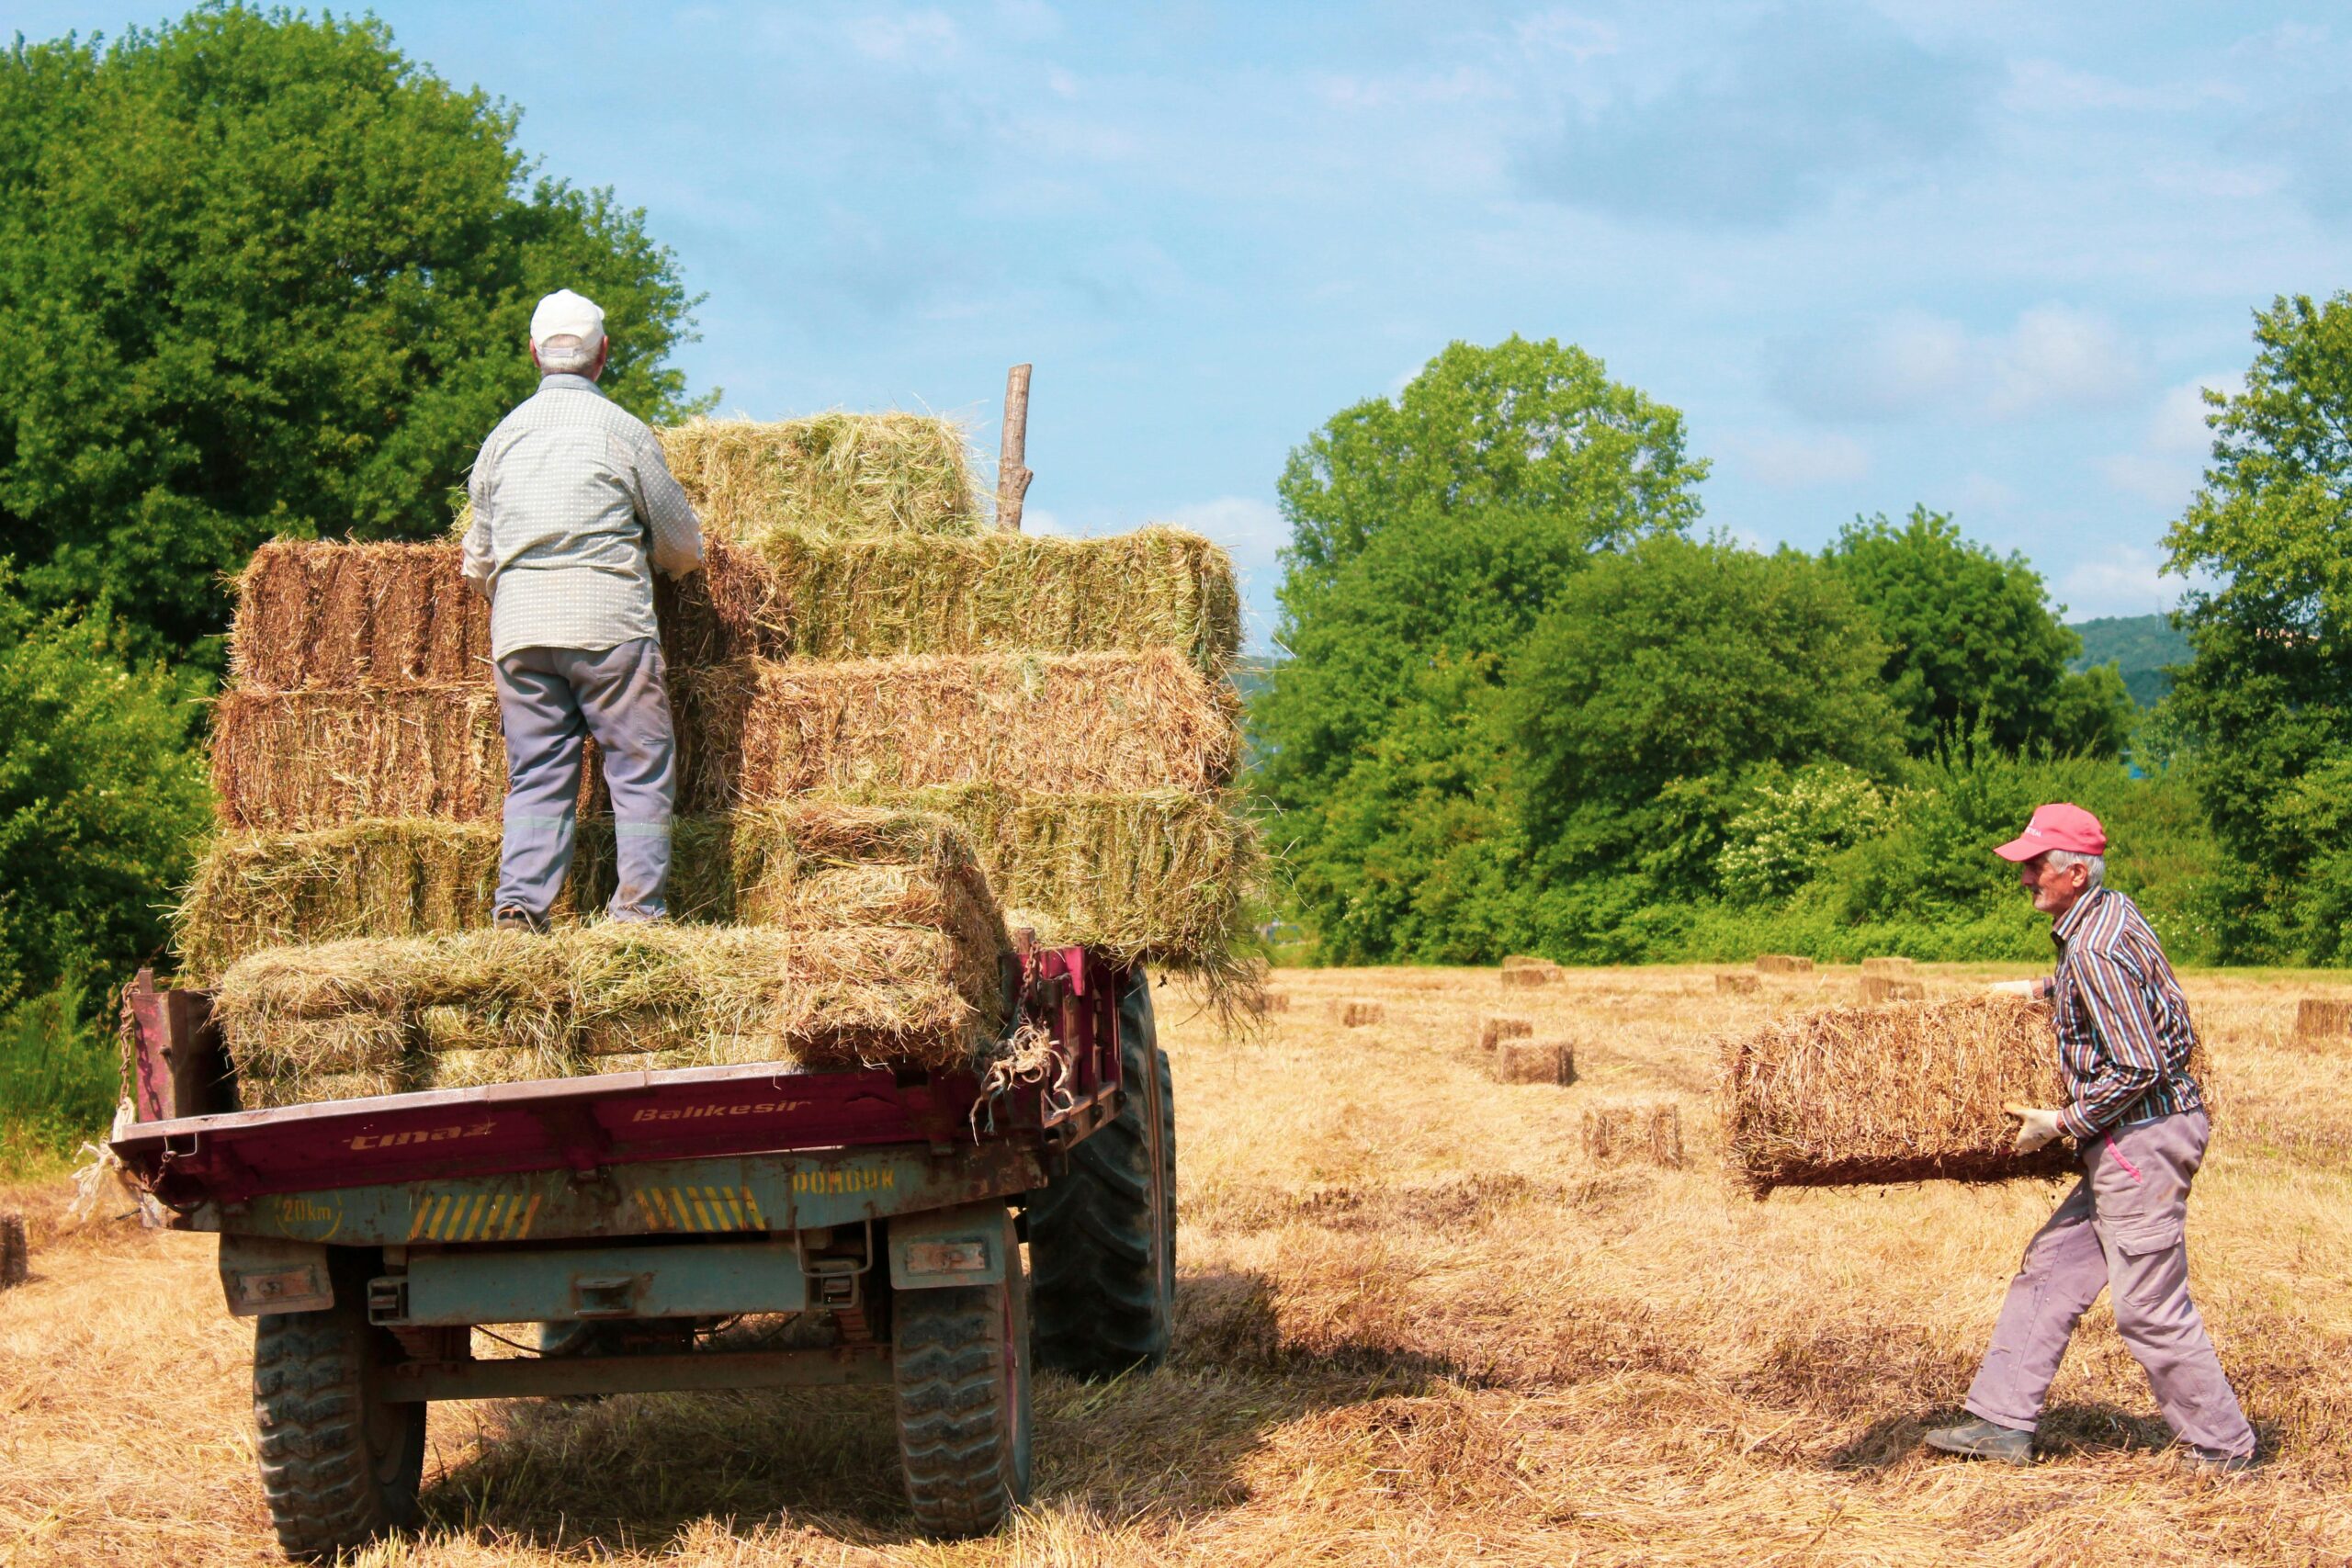 Farmers Loading Hay on a Tractor